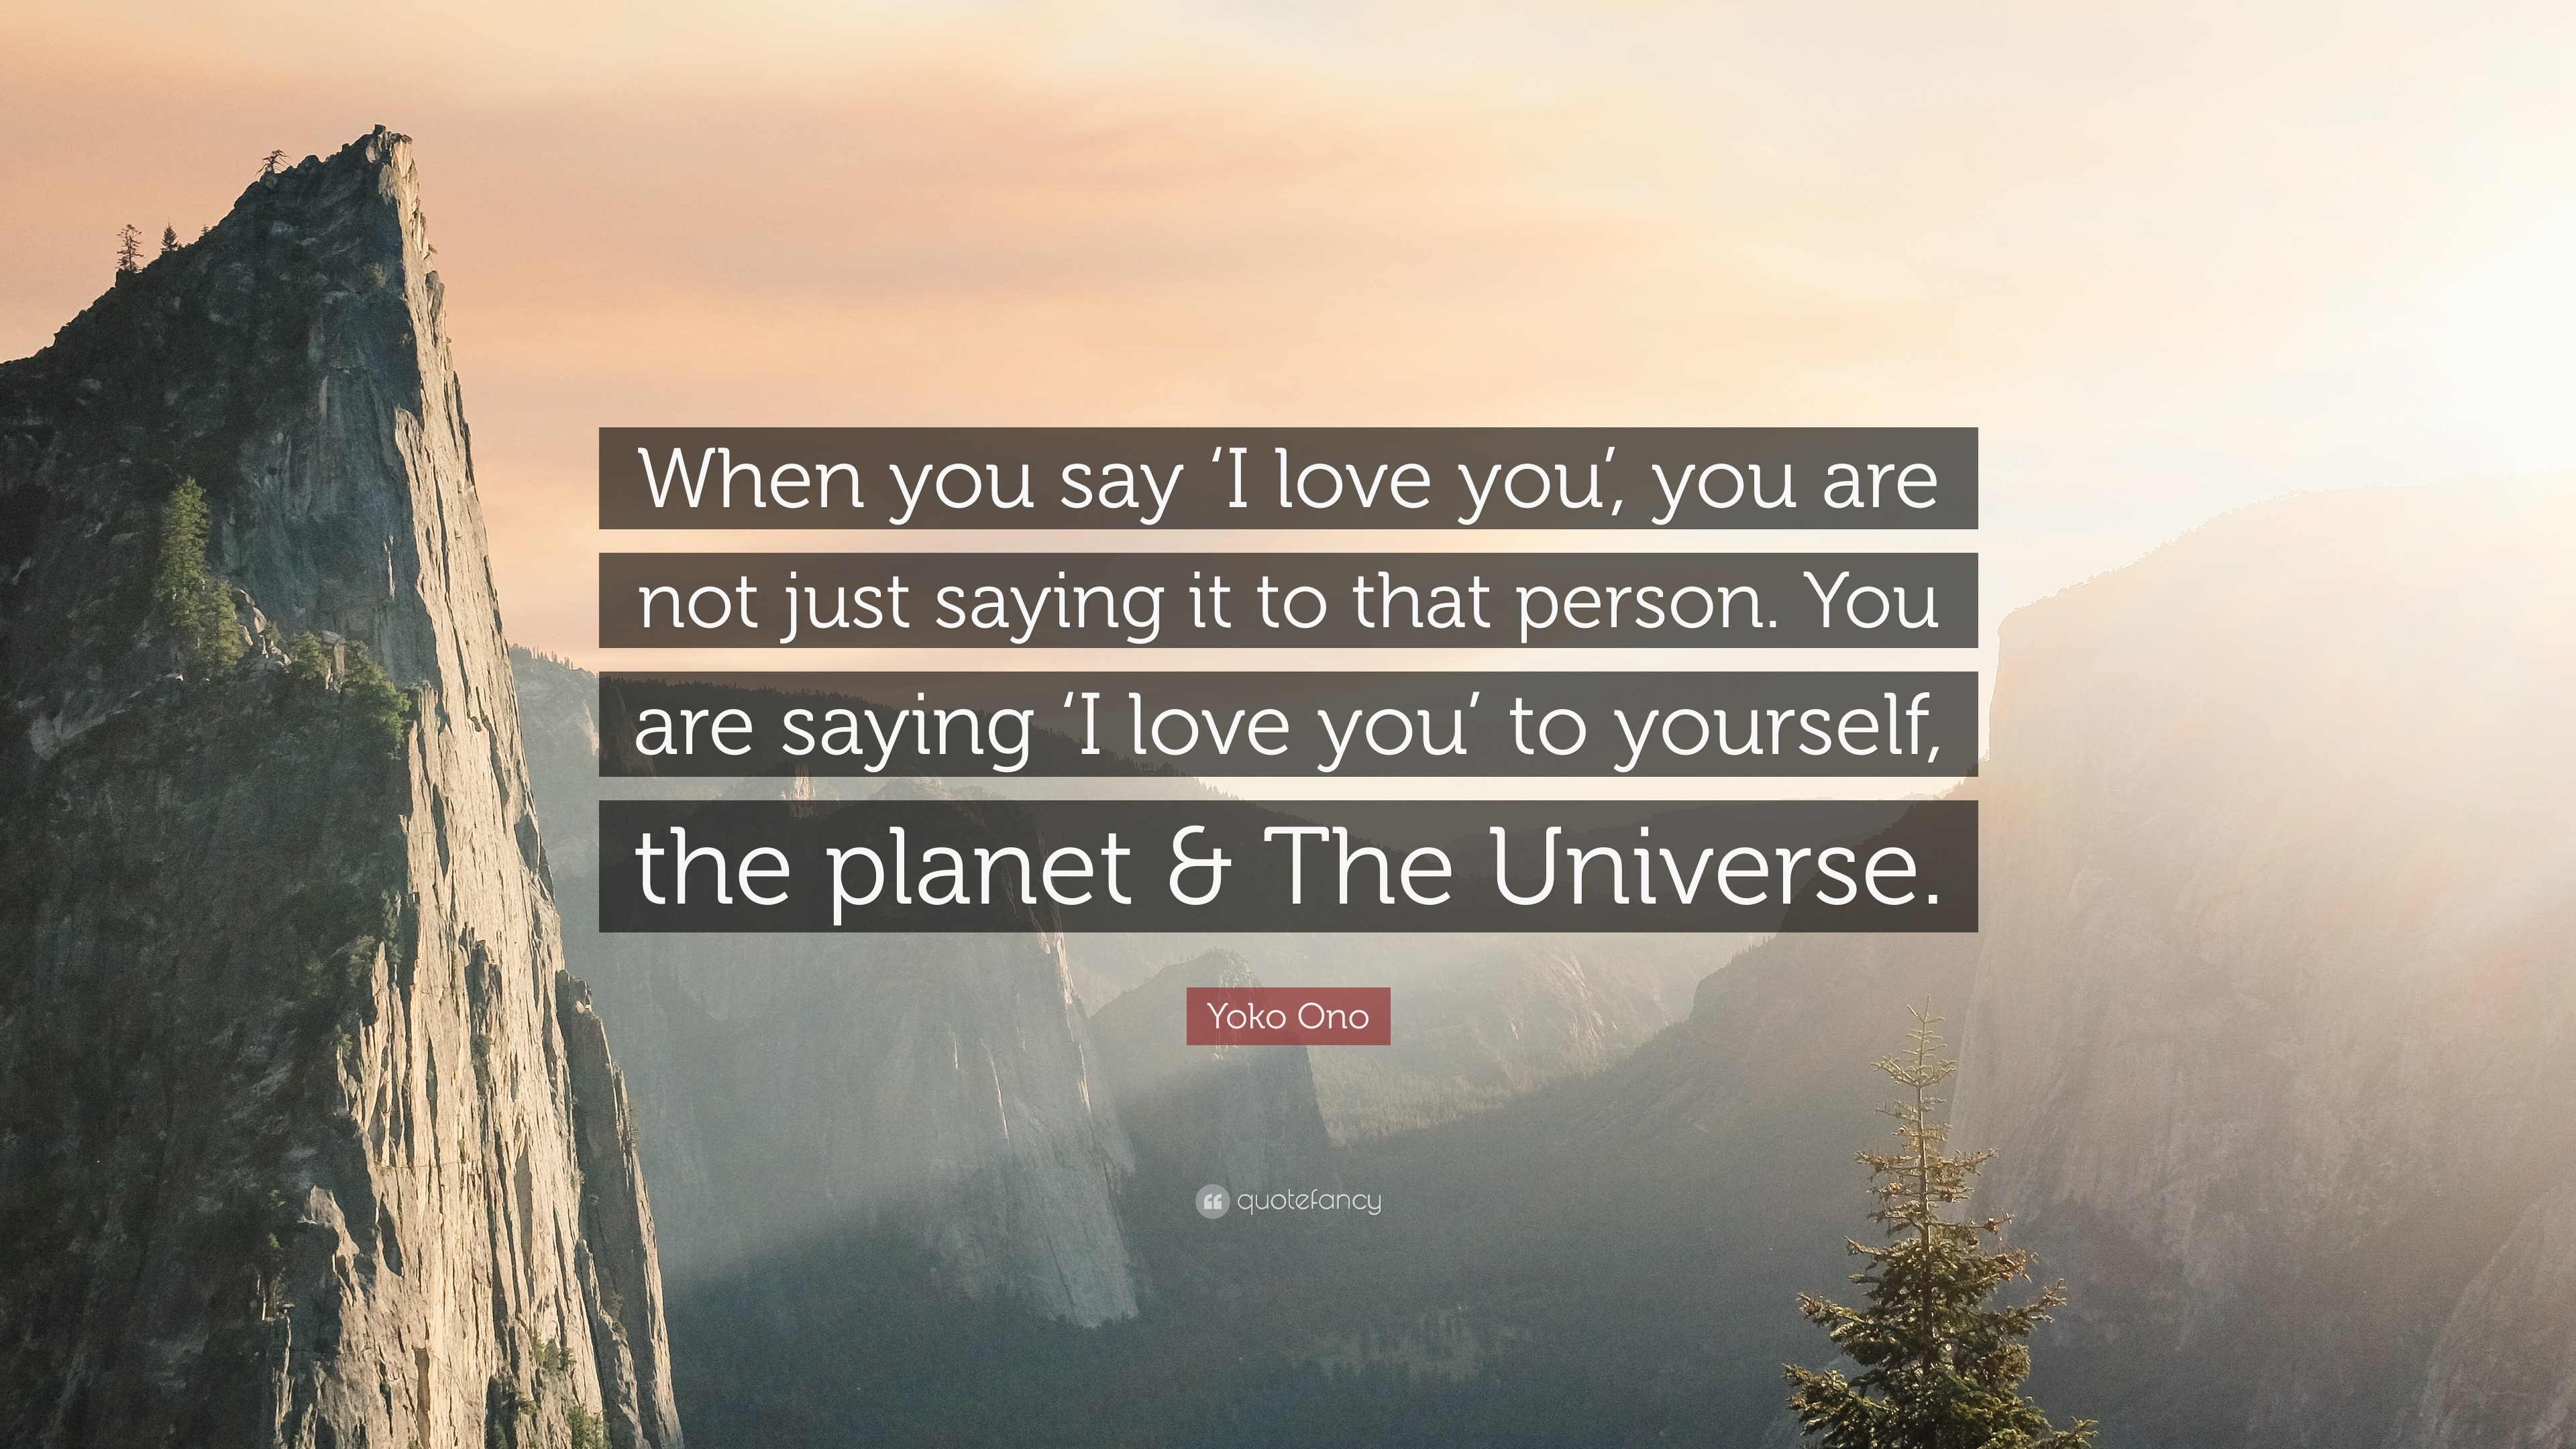 Yoko o Quote “When you say I love you you are